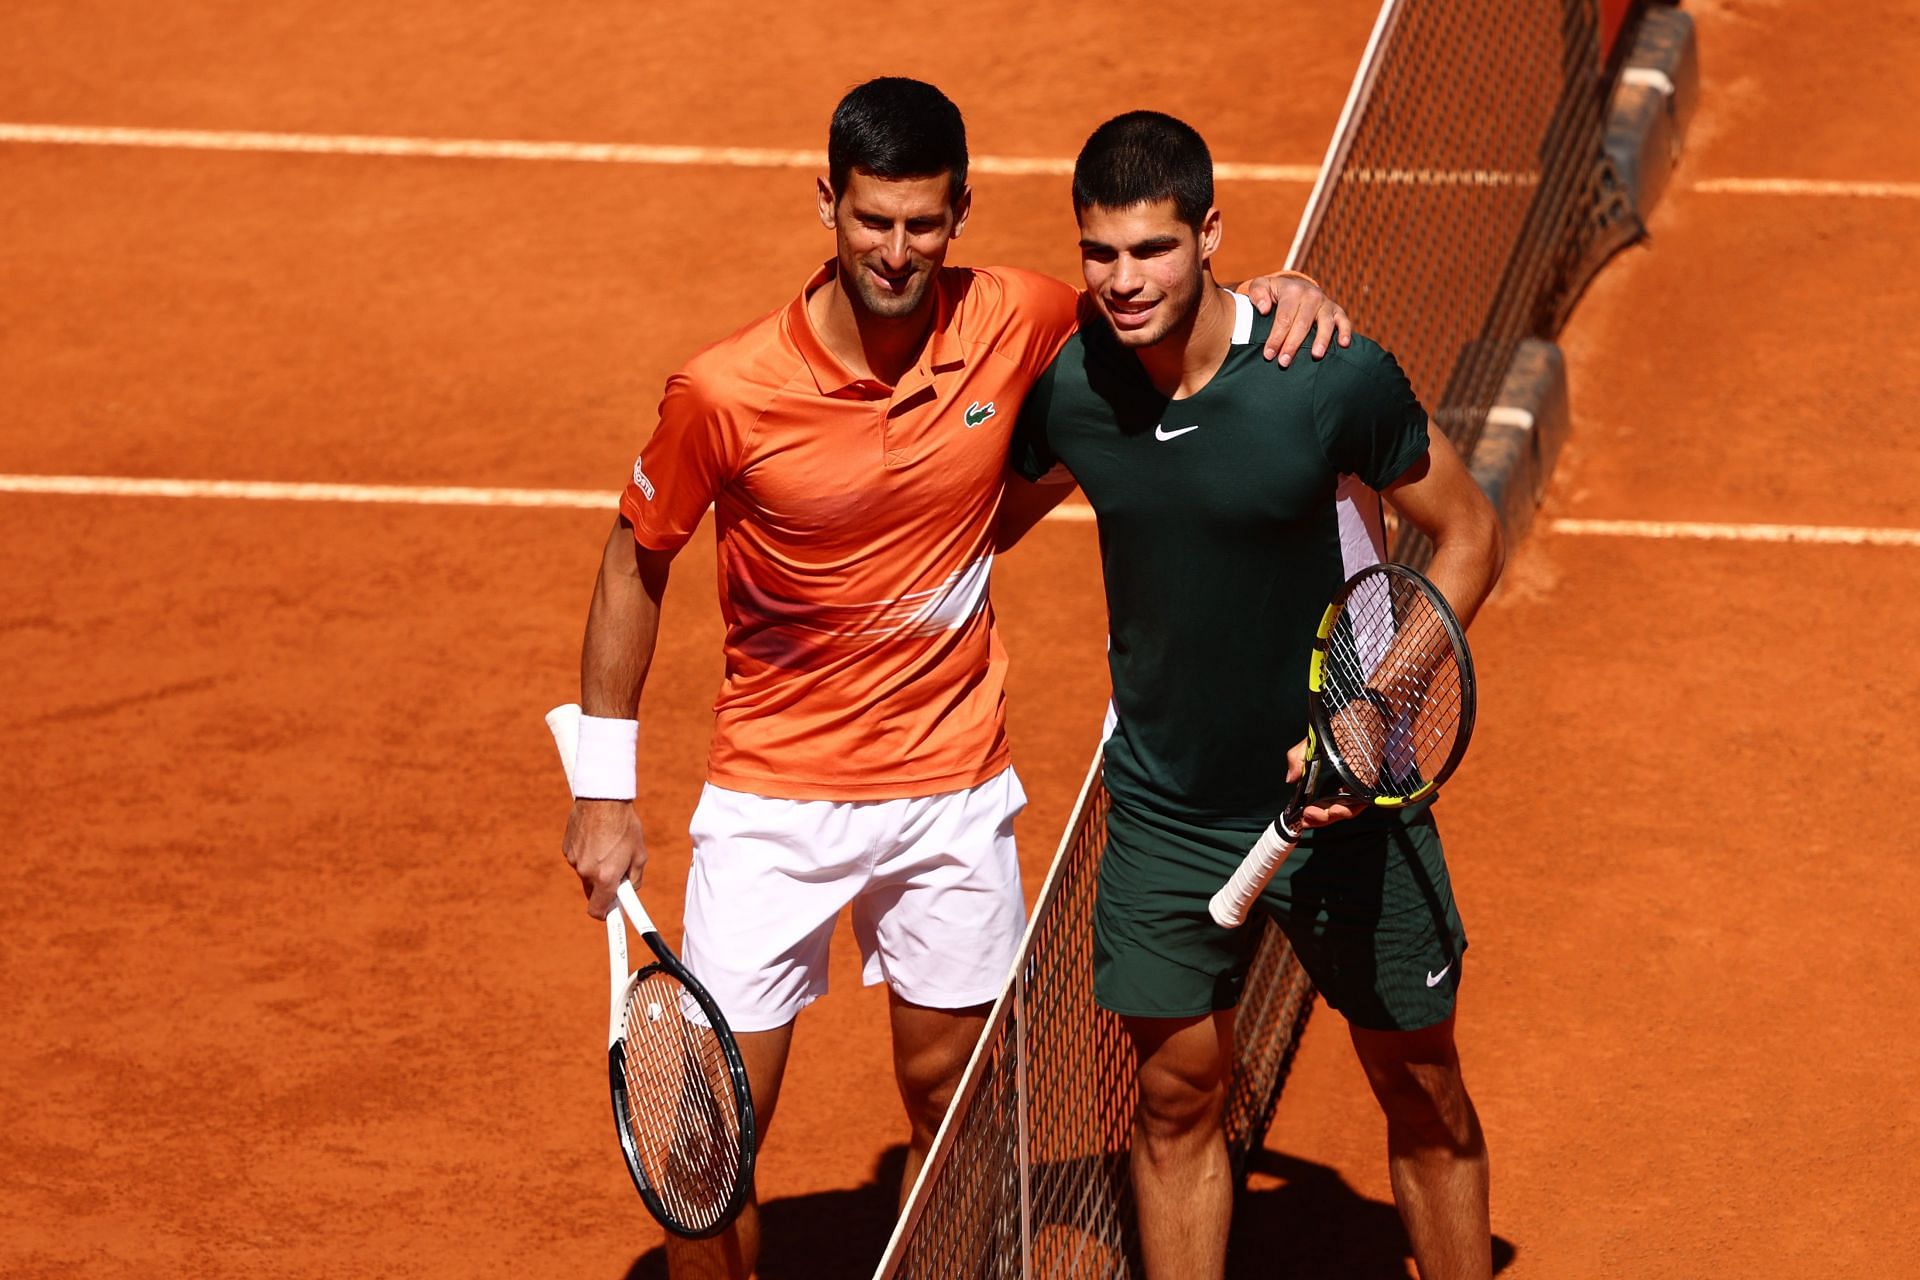 Djokovic and Alcaraz pose before a game in Madrid Open.